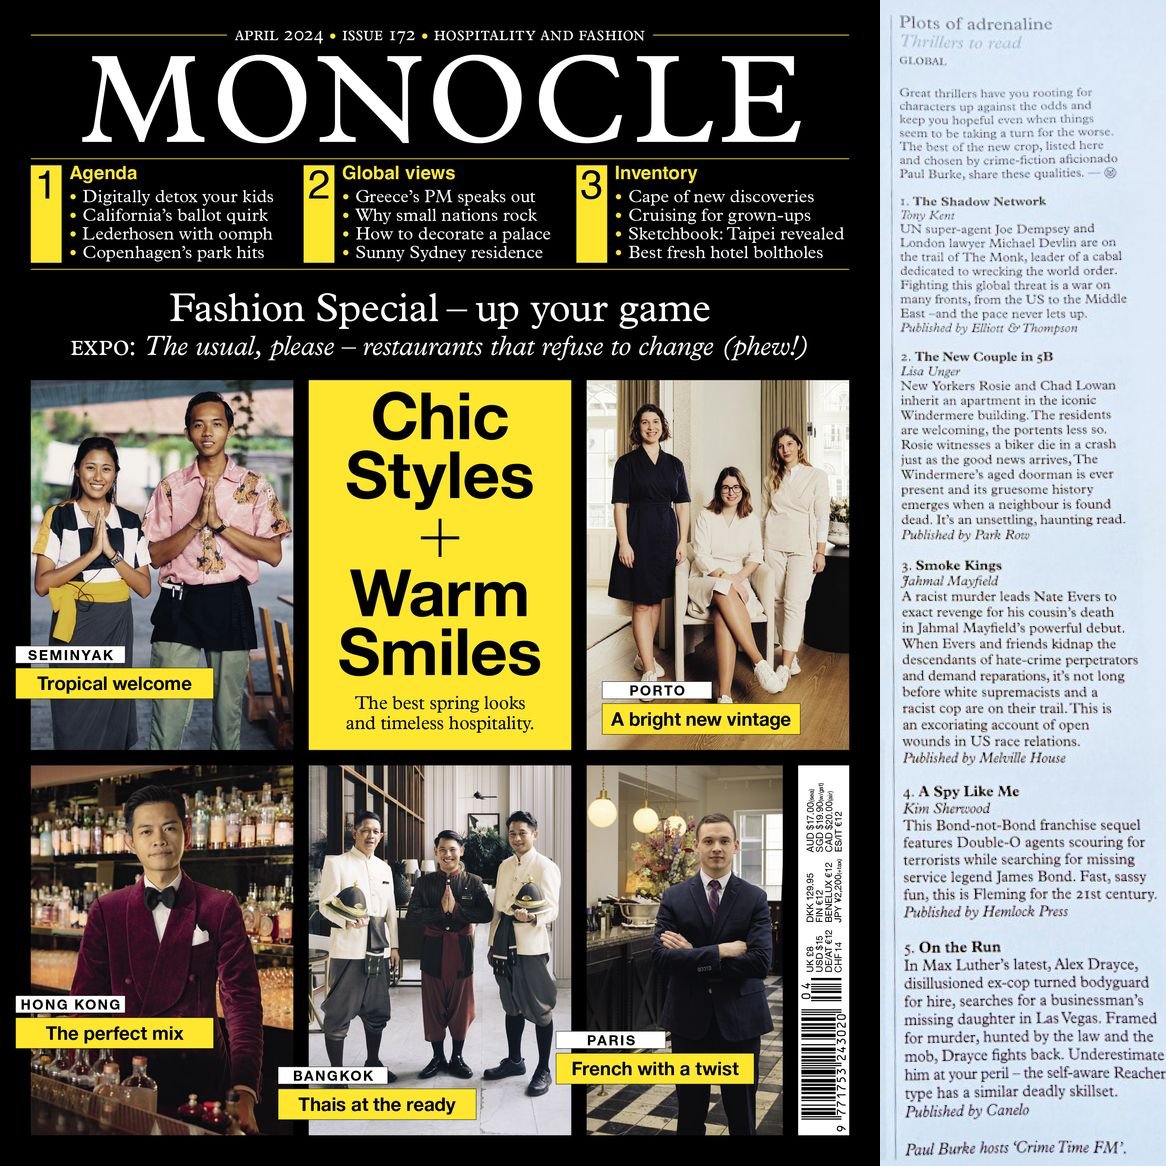 Thanks for including THE NEW COUPLE IN 5B in your thriller book recs for the latest issue of @MonocleMag! “An unsettling, haunting read.” —@Paulodaburka @CrimeTimeUK